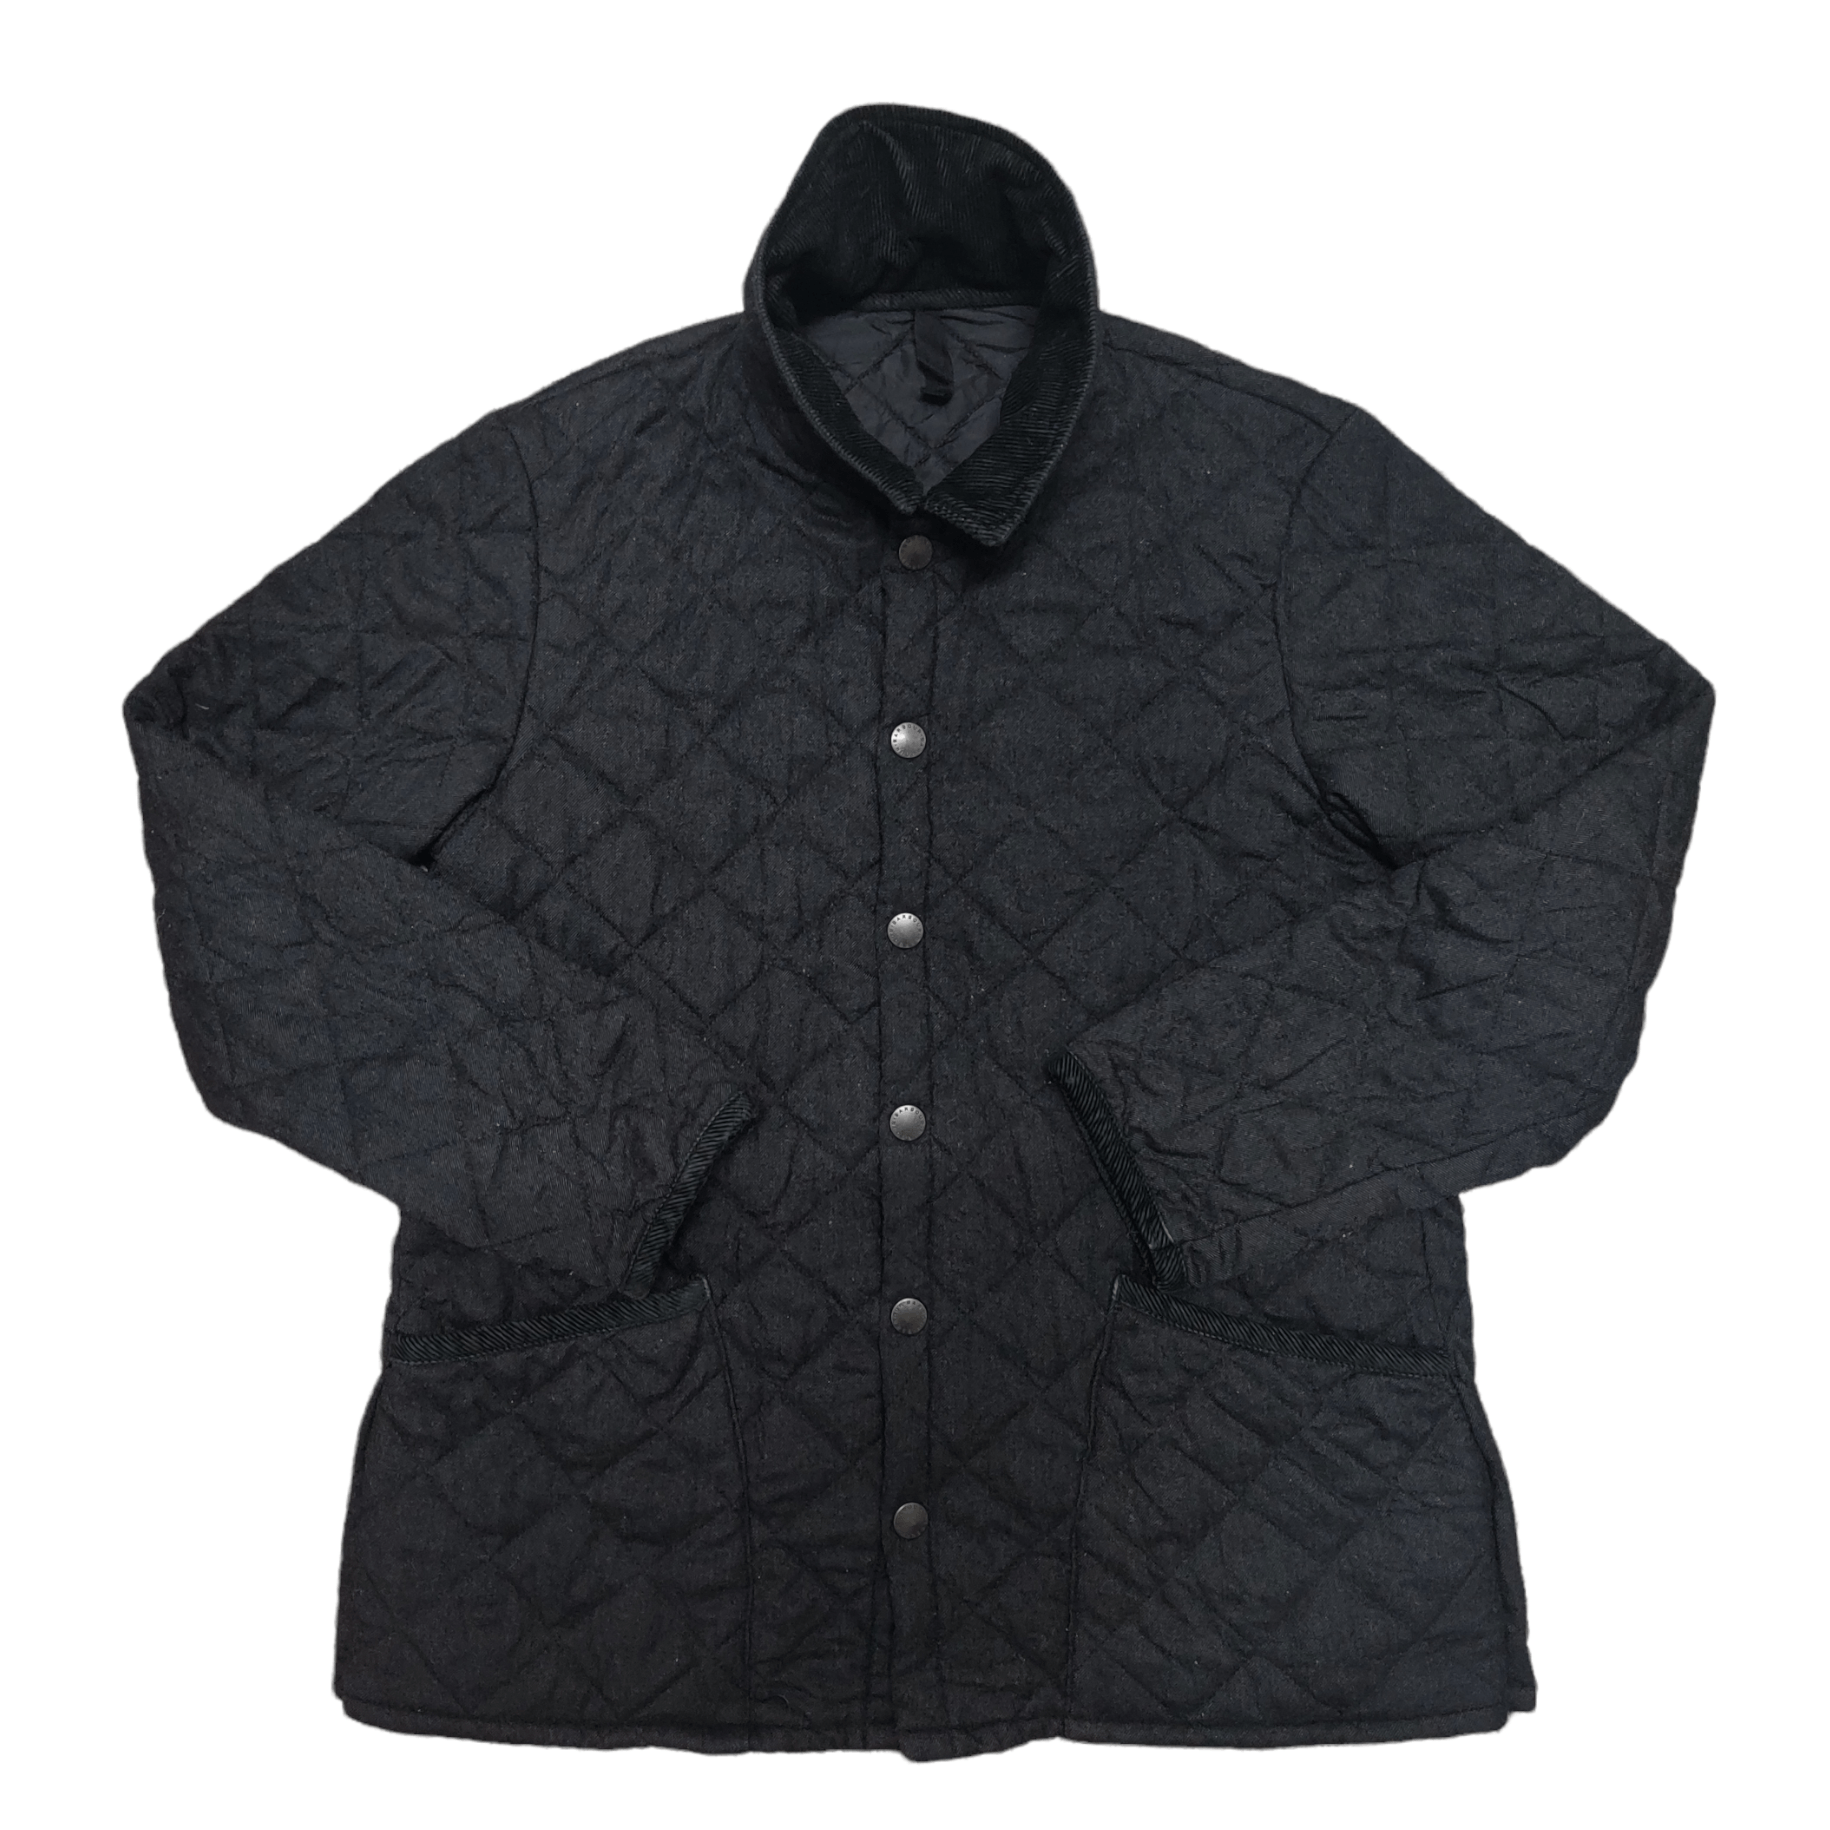 Barbour Quilted Jacket - 1